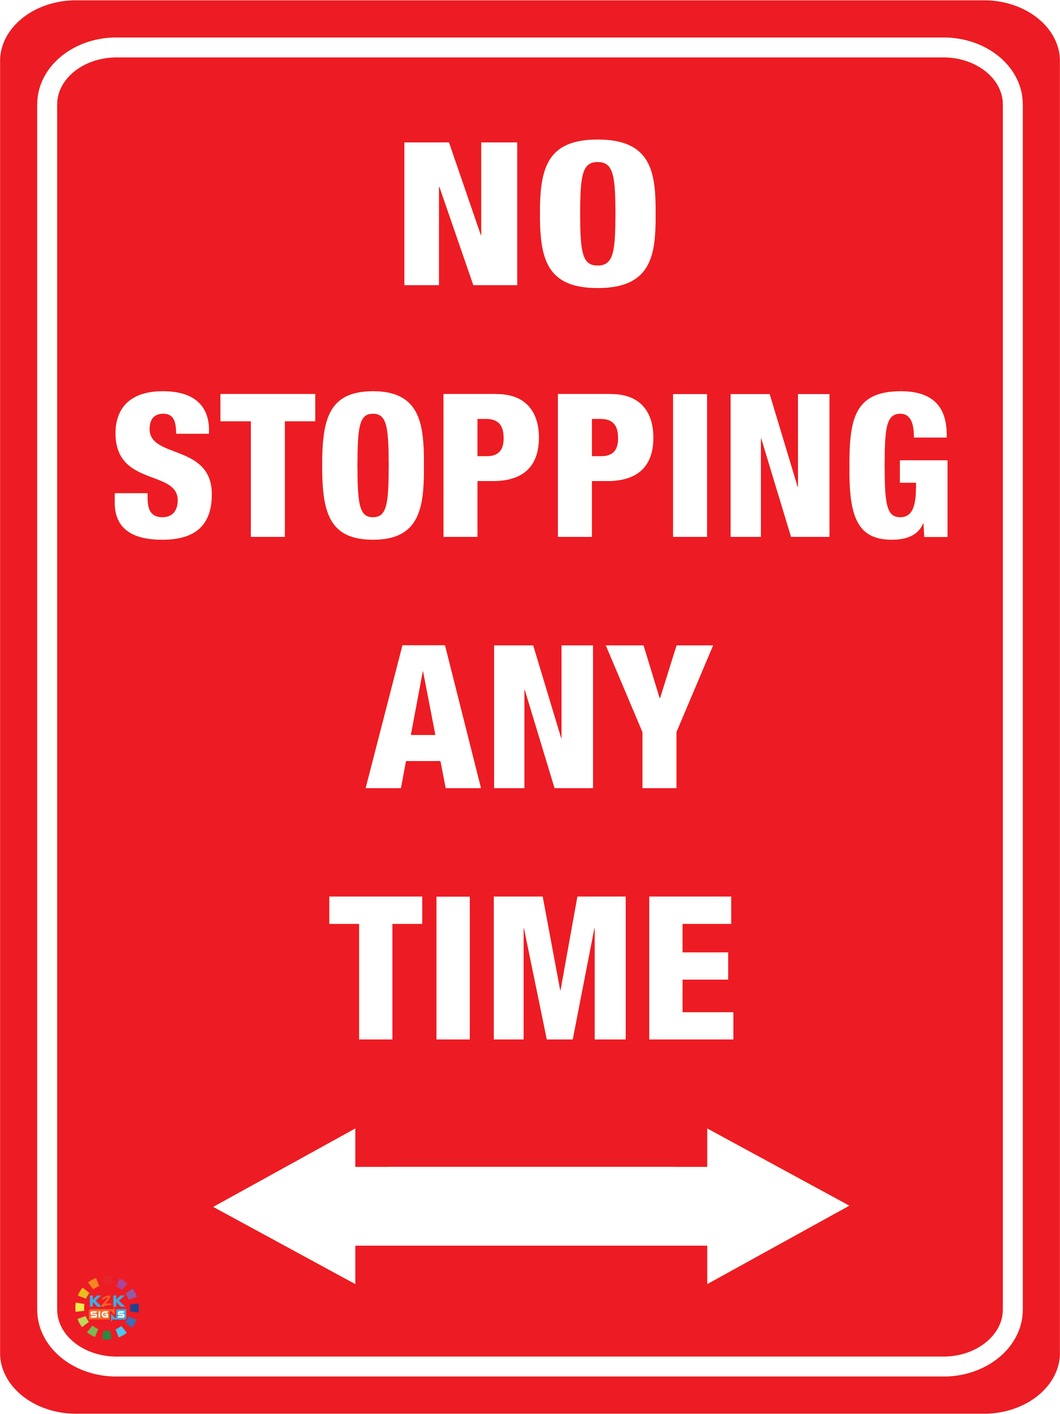 No Stopping At Any Time - Two Way Arrow Sign